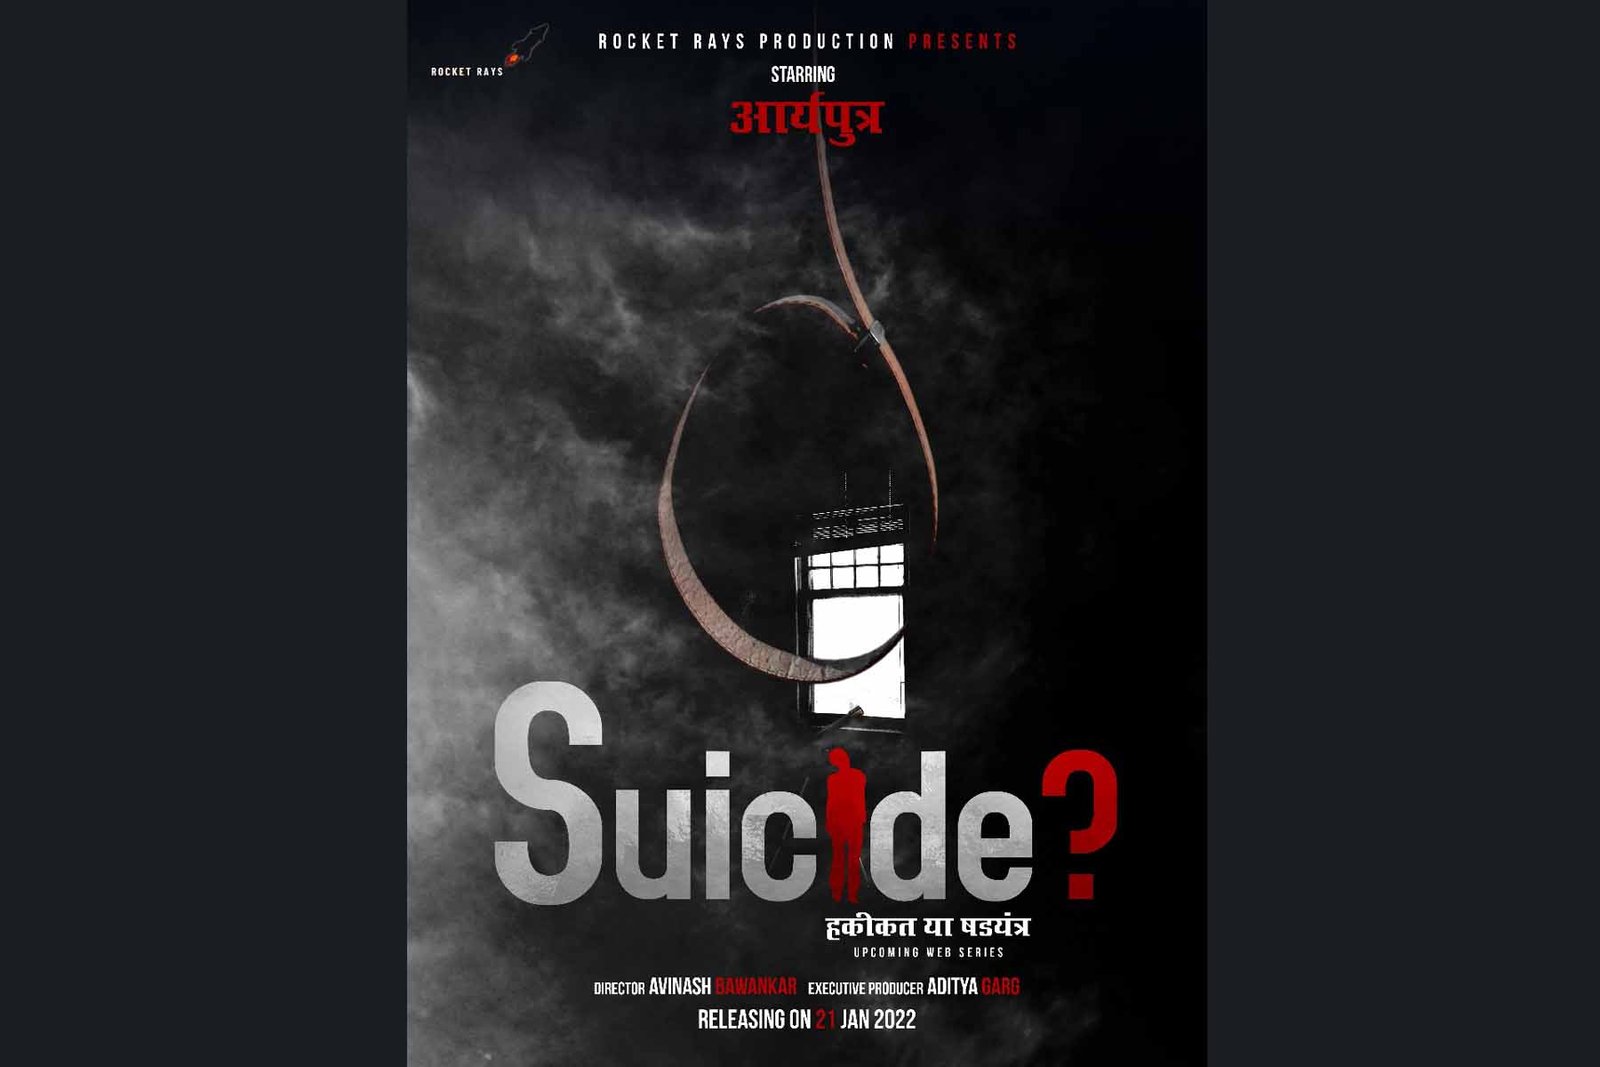 ‘Suicide? – Haqeeqat ya Kshadyantra a thriller-drama web series soon to hit your screens